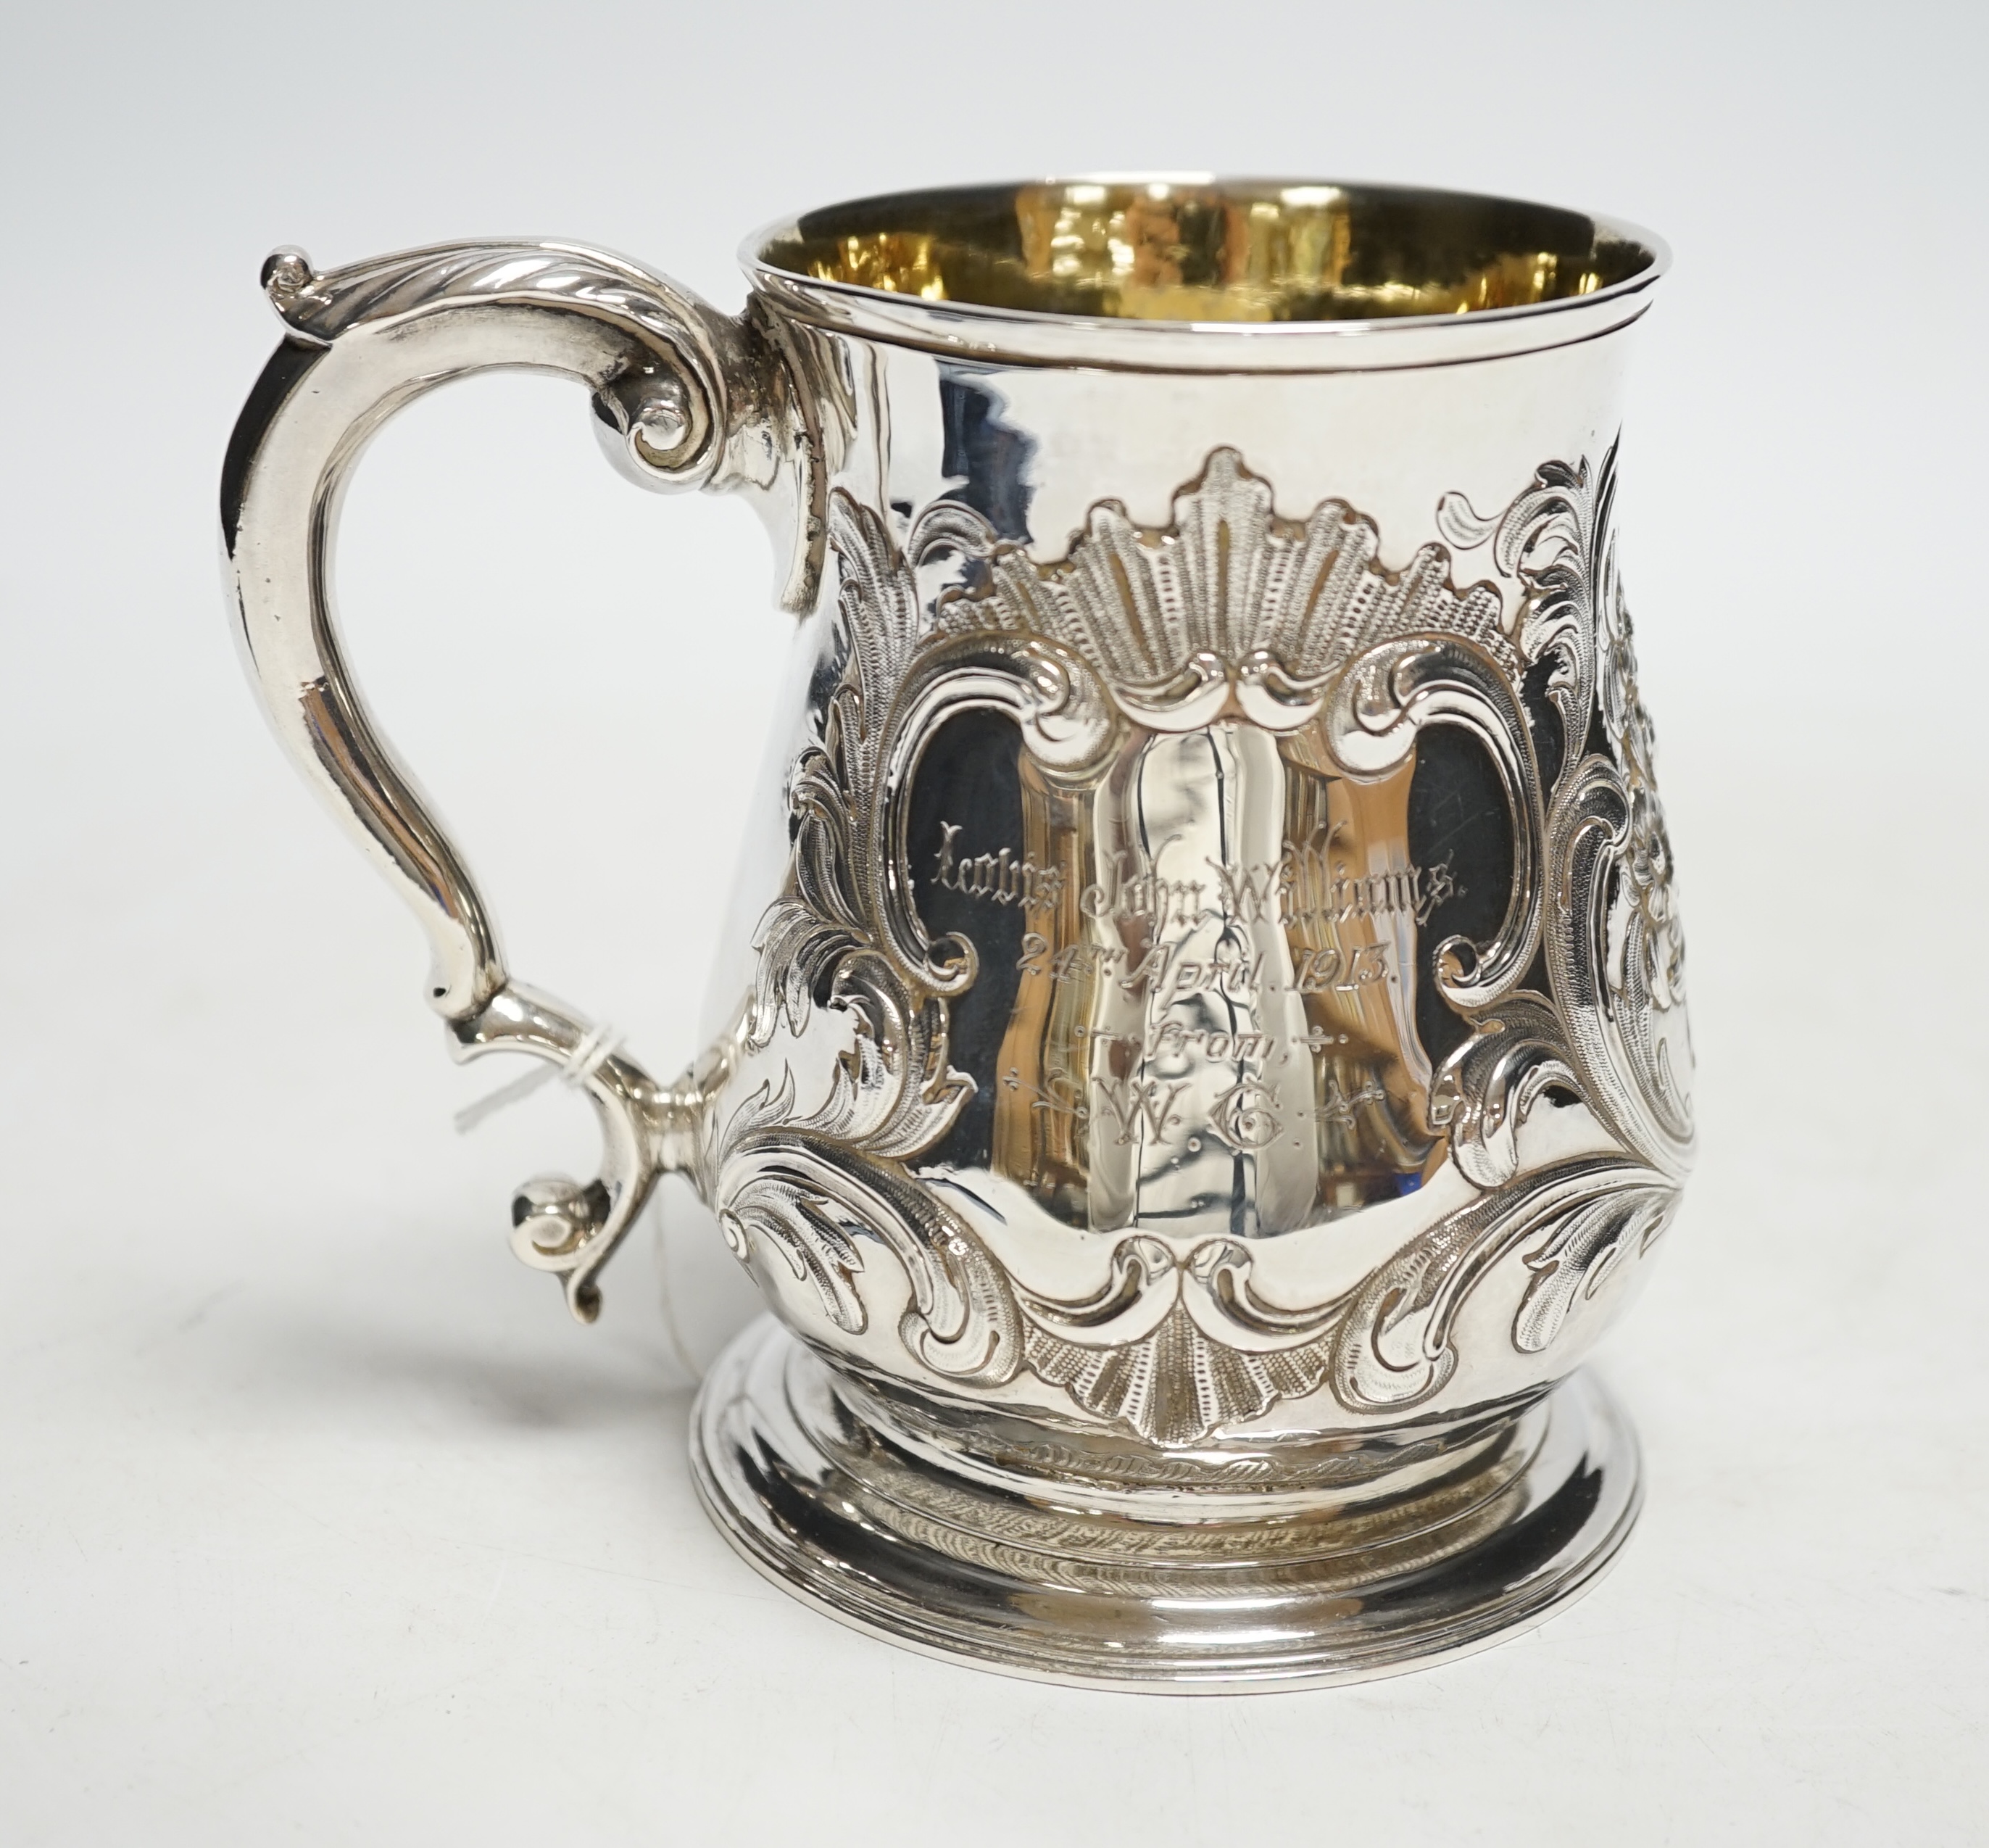 A George II silver pint mug, by John Broughton?, London, 1746, with later embossed decoration and later engraved inscription, 11.8cm, 10.7oz.